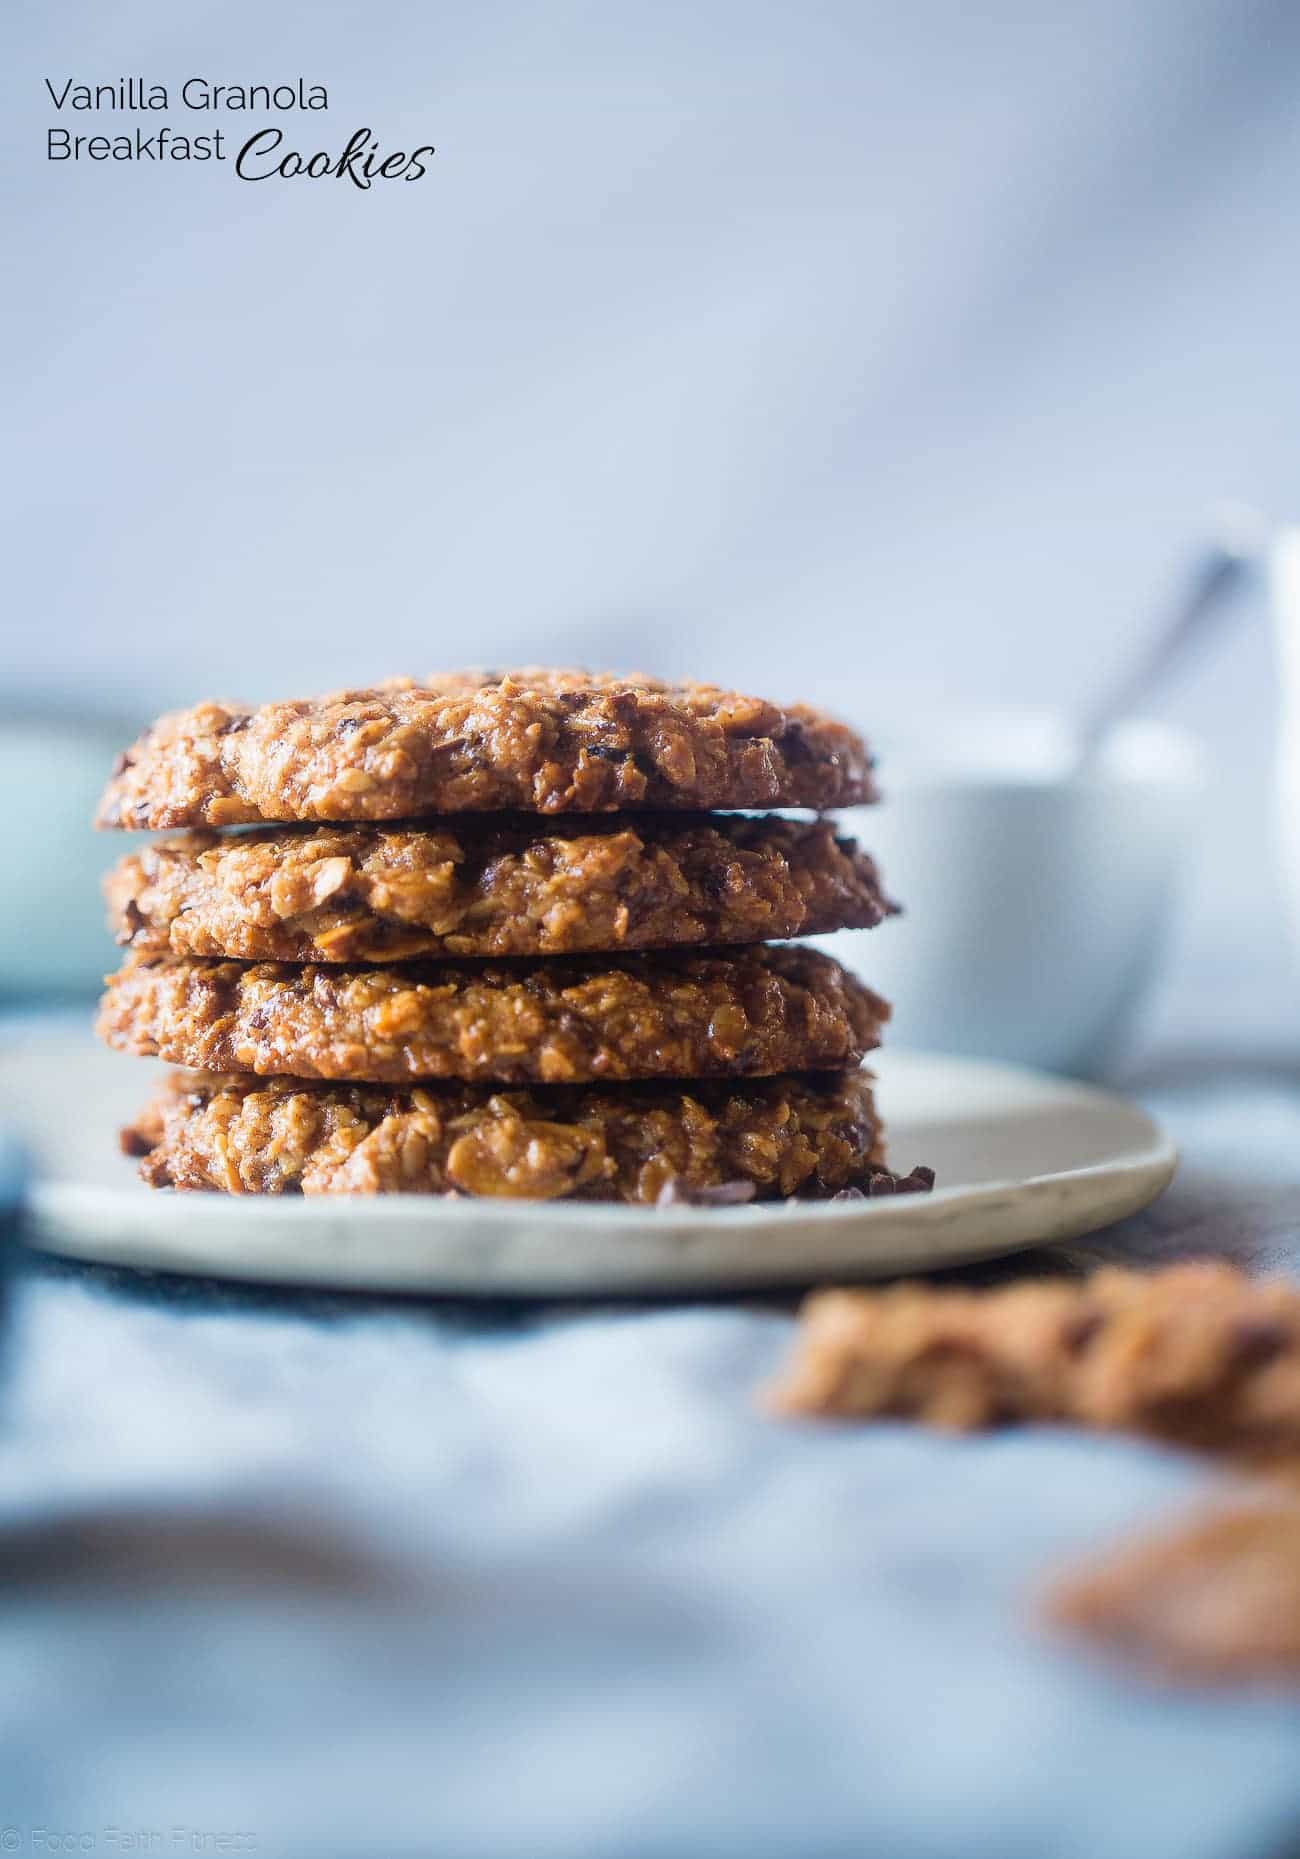 Gluten Free Granola Oatmeal Breakfast Cookies - These kid-friendly healthy breakfast cookies use granola for added crunch! They're gluten and egg free, made in one bowl and are great for busy mornings! | Foodfaithfitness.com | @FoodFaithFit